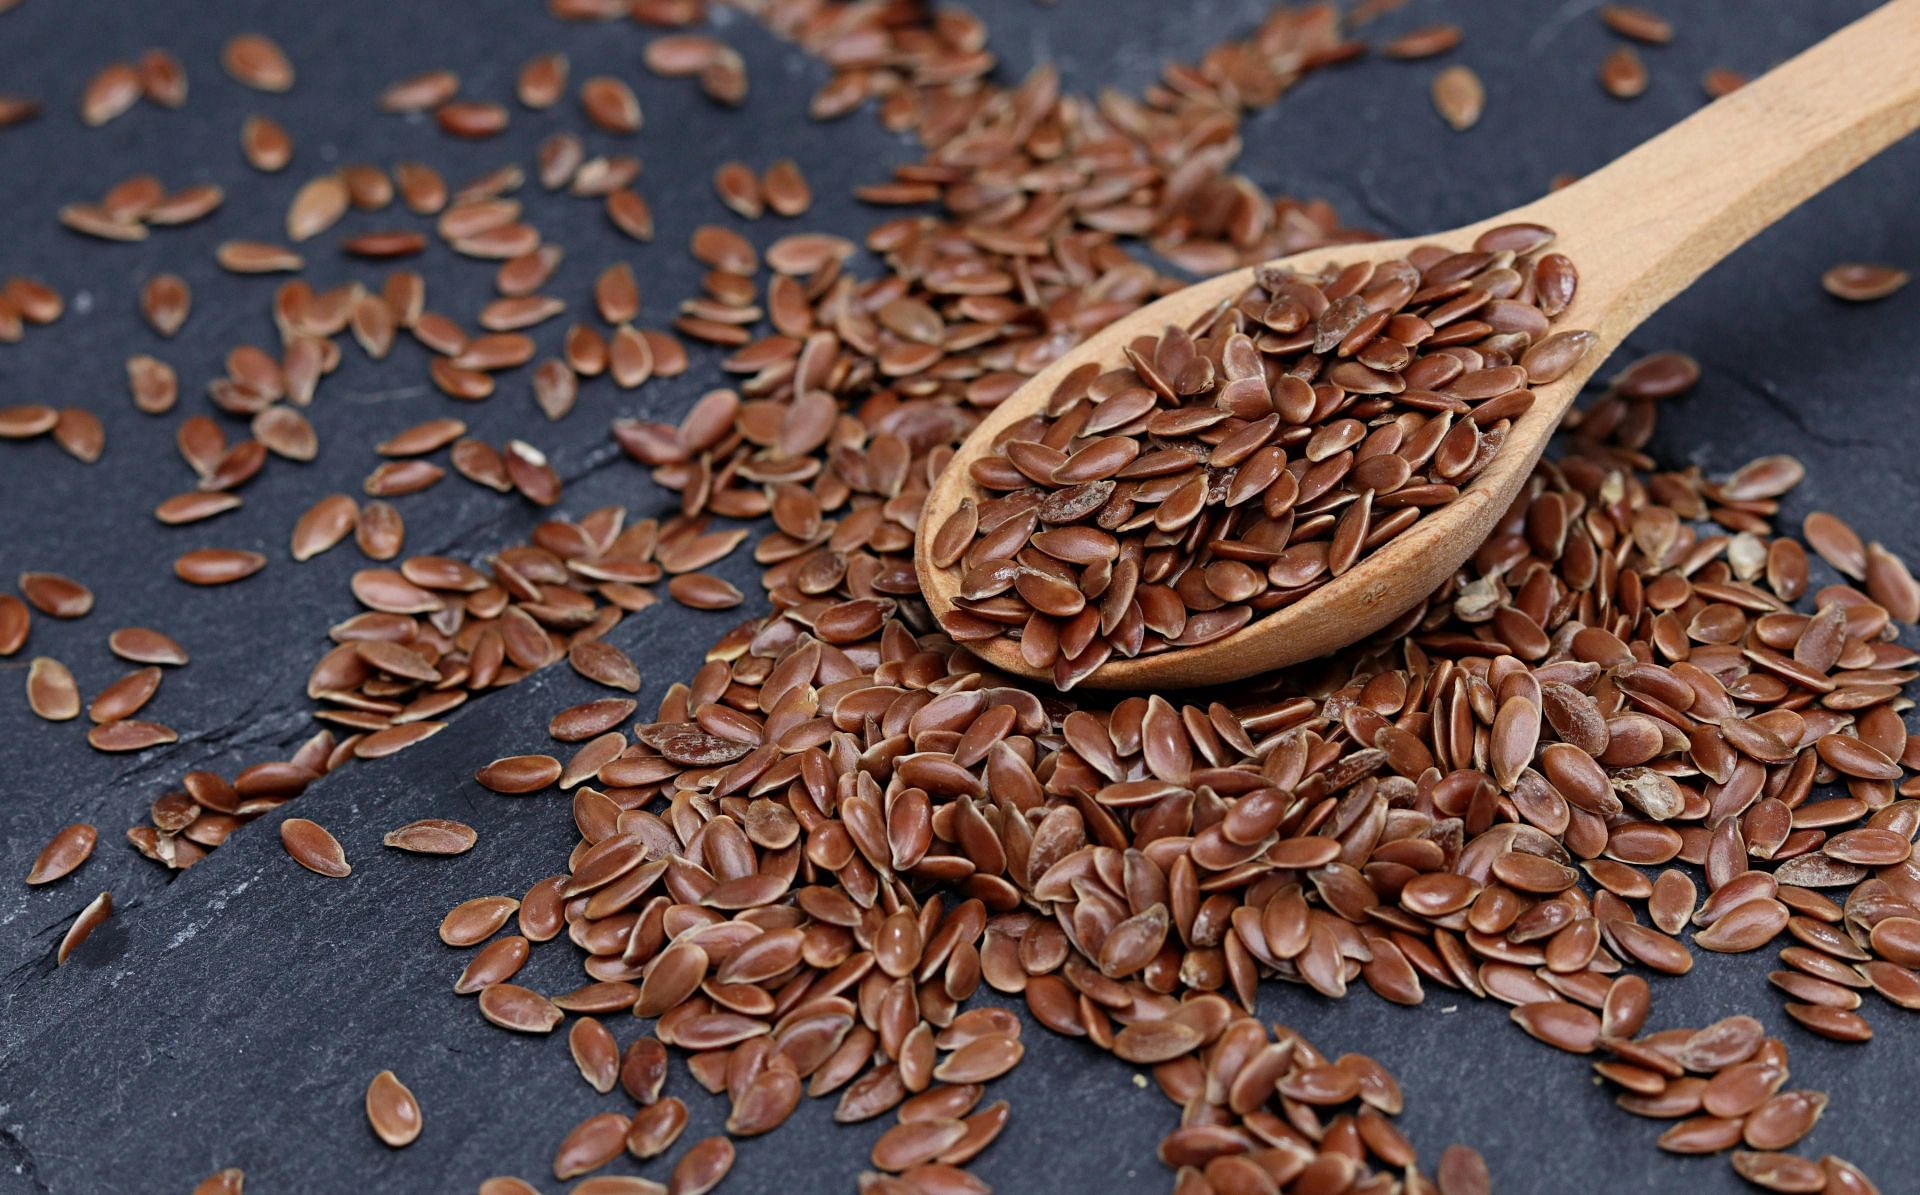 Importance of Chia seeds vs flax seeds (image sourced via Pexels / Photo by marek)